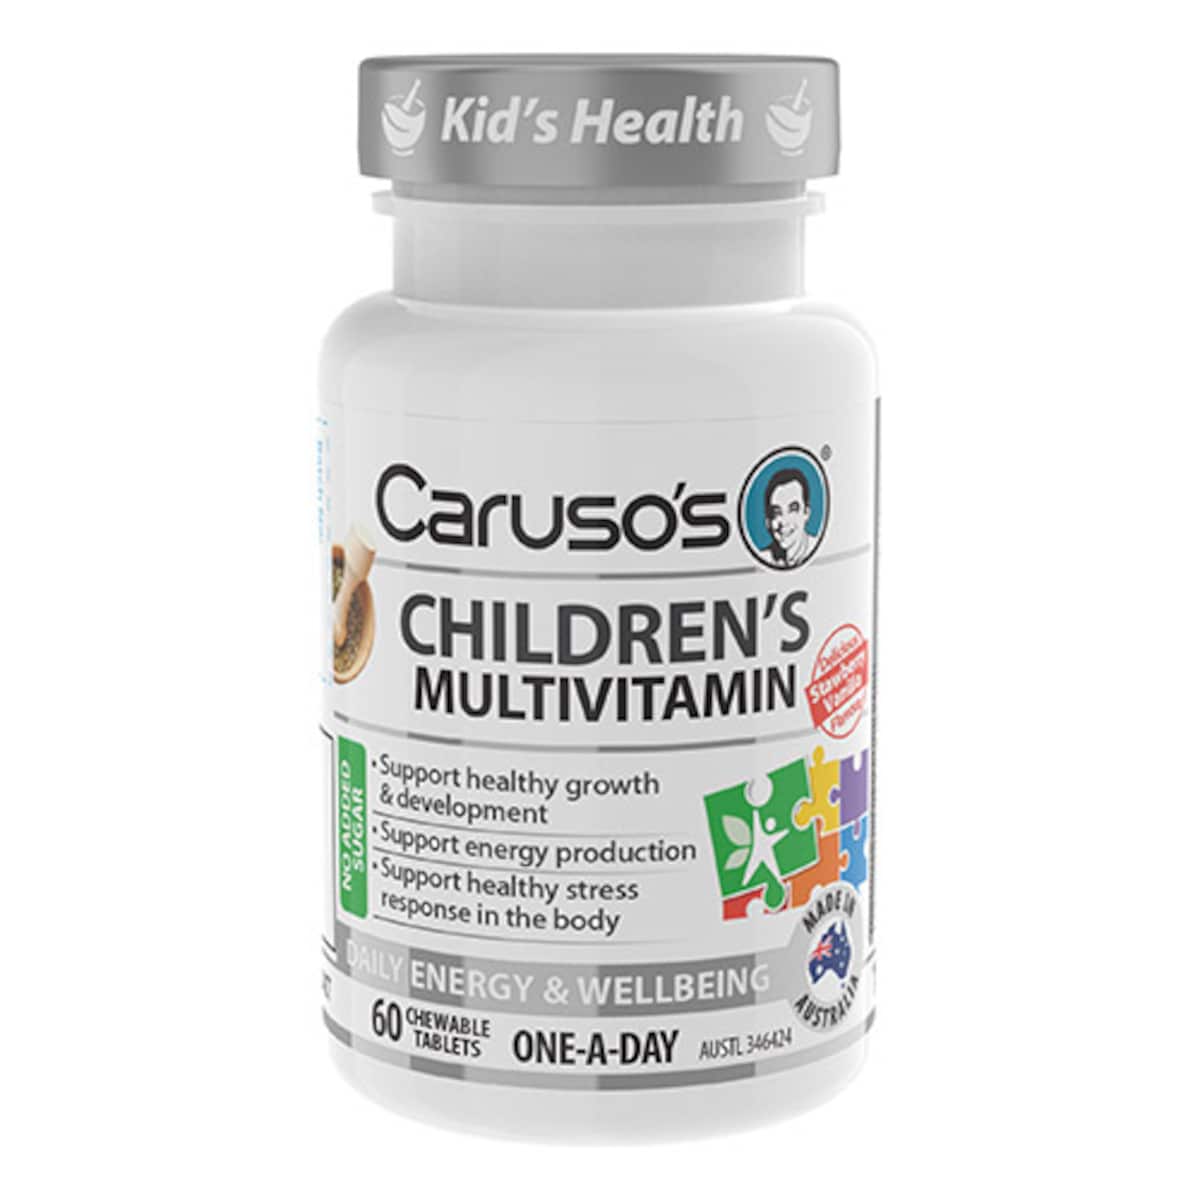 Carusos Childrens Multivitamin 60 Chewable Tablets